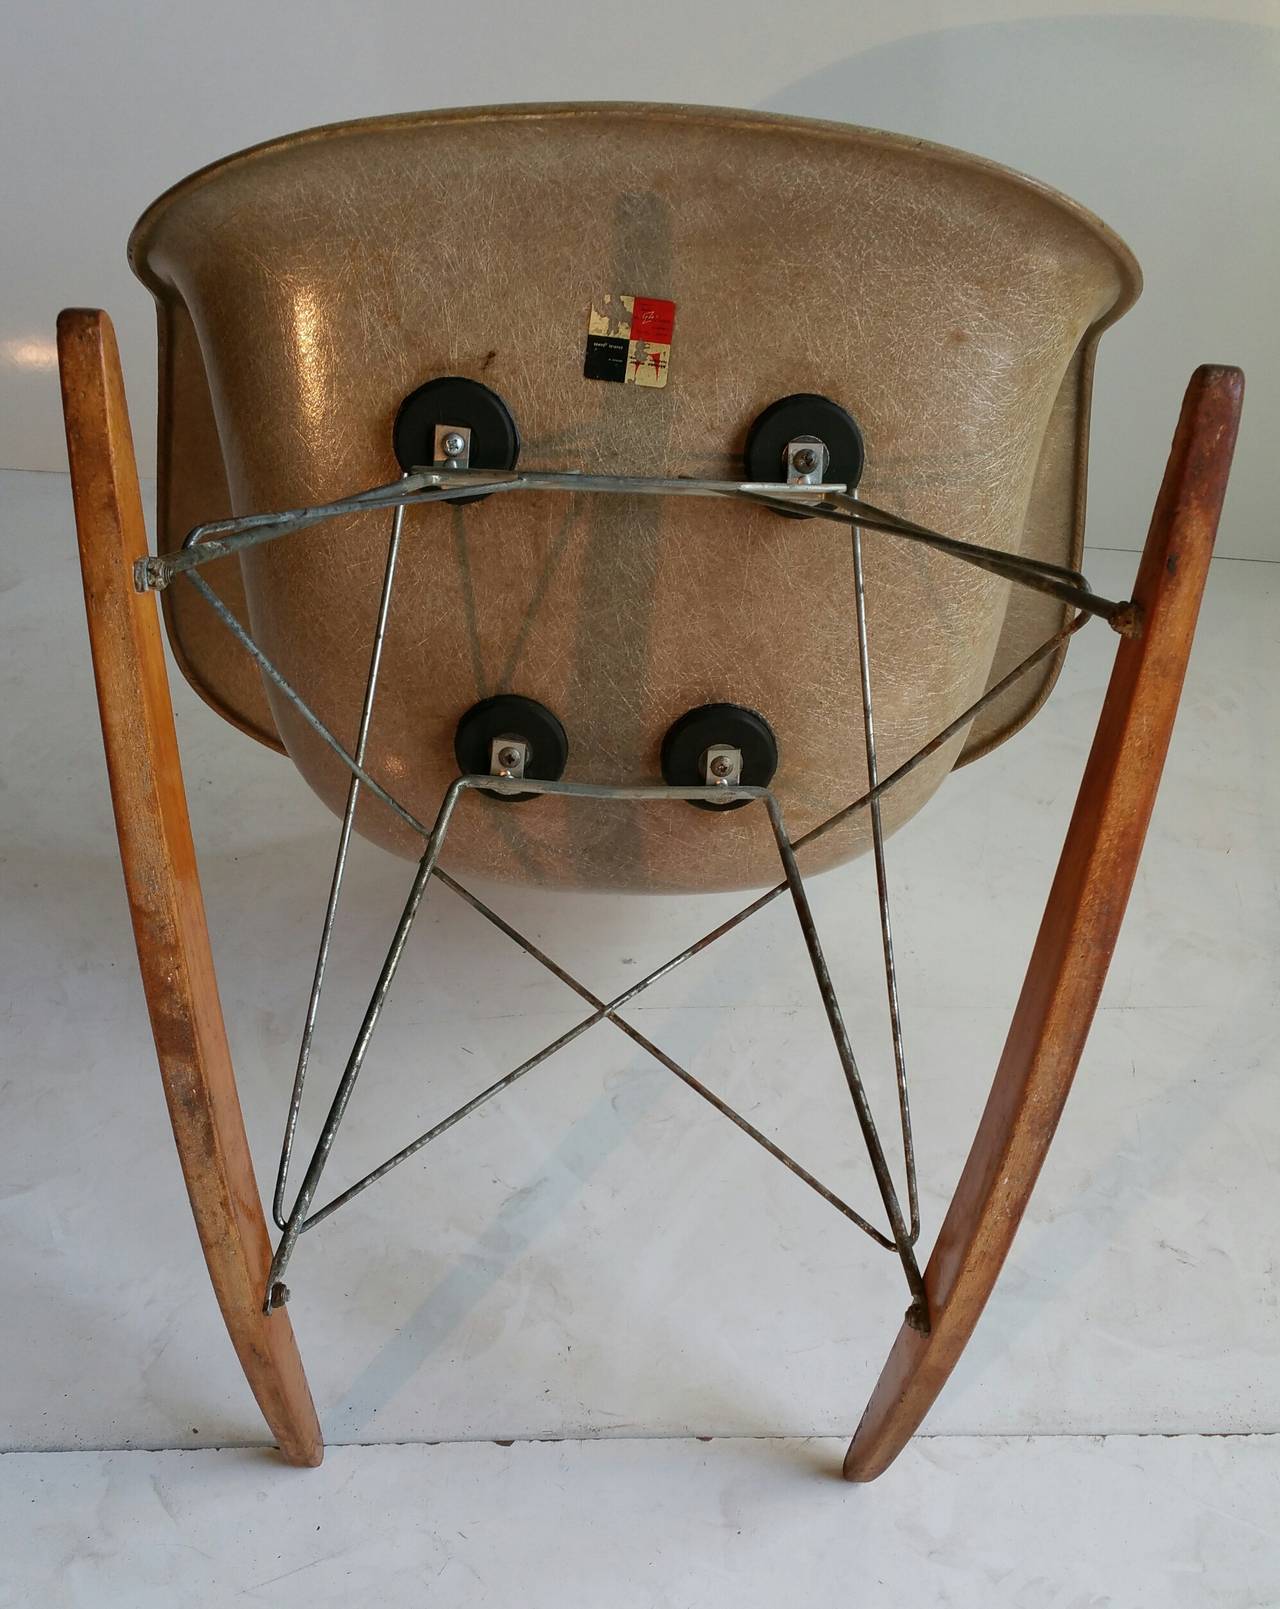 Fiberglass First Year Production of Charles and Ray Eames Rope-Edge Rocker, Zenith Labell